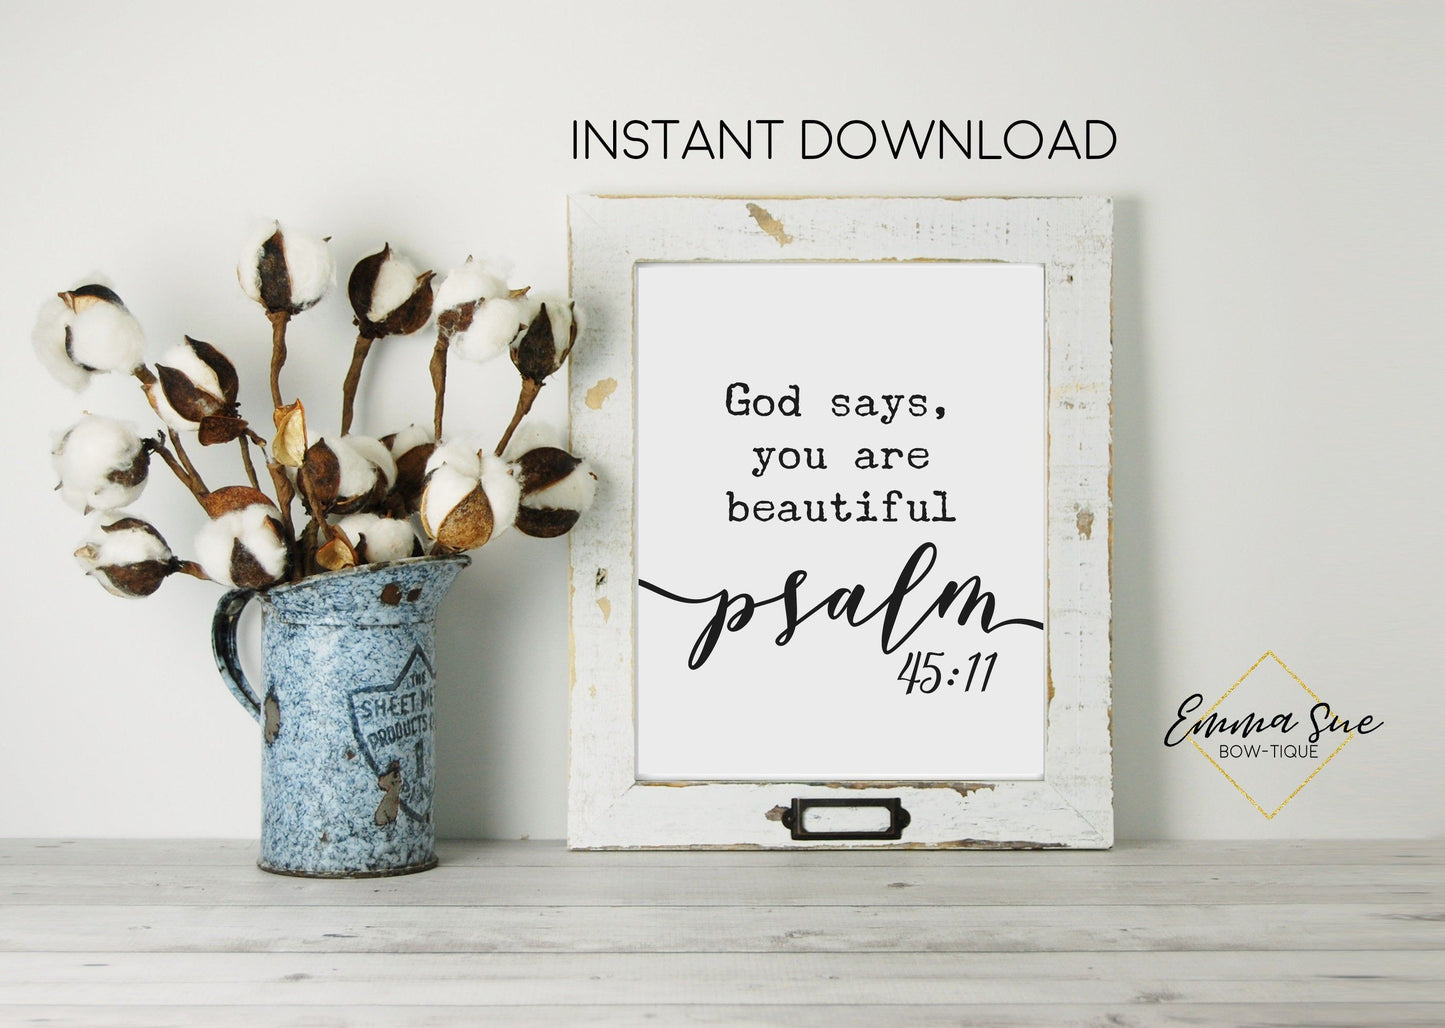 God says you are beautiful Psalm 45:11 Bible Scripture Farmhouse Wall Art Printable